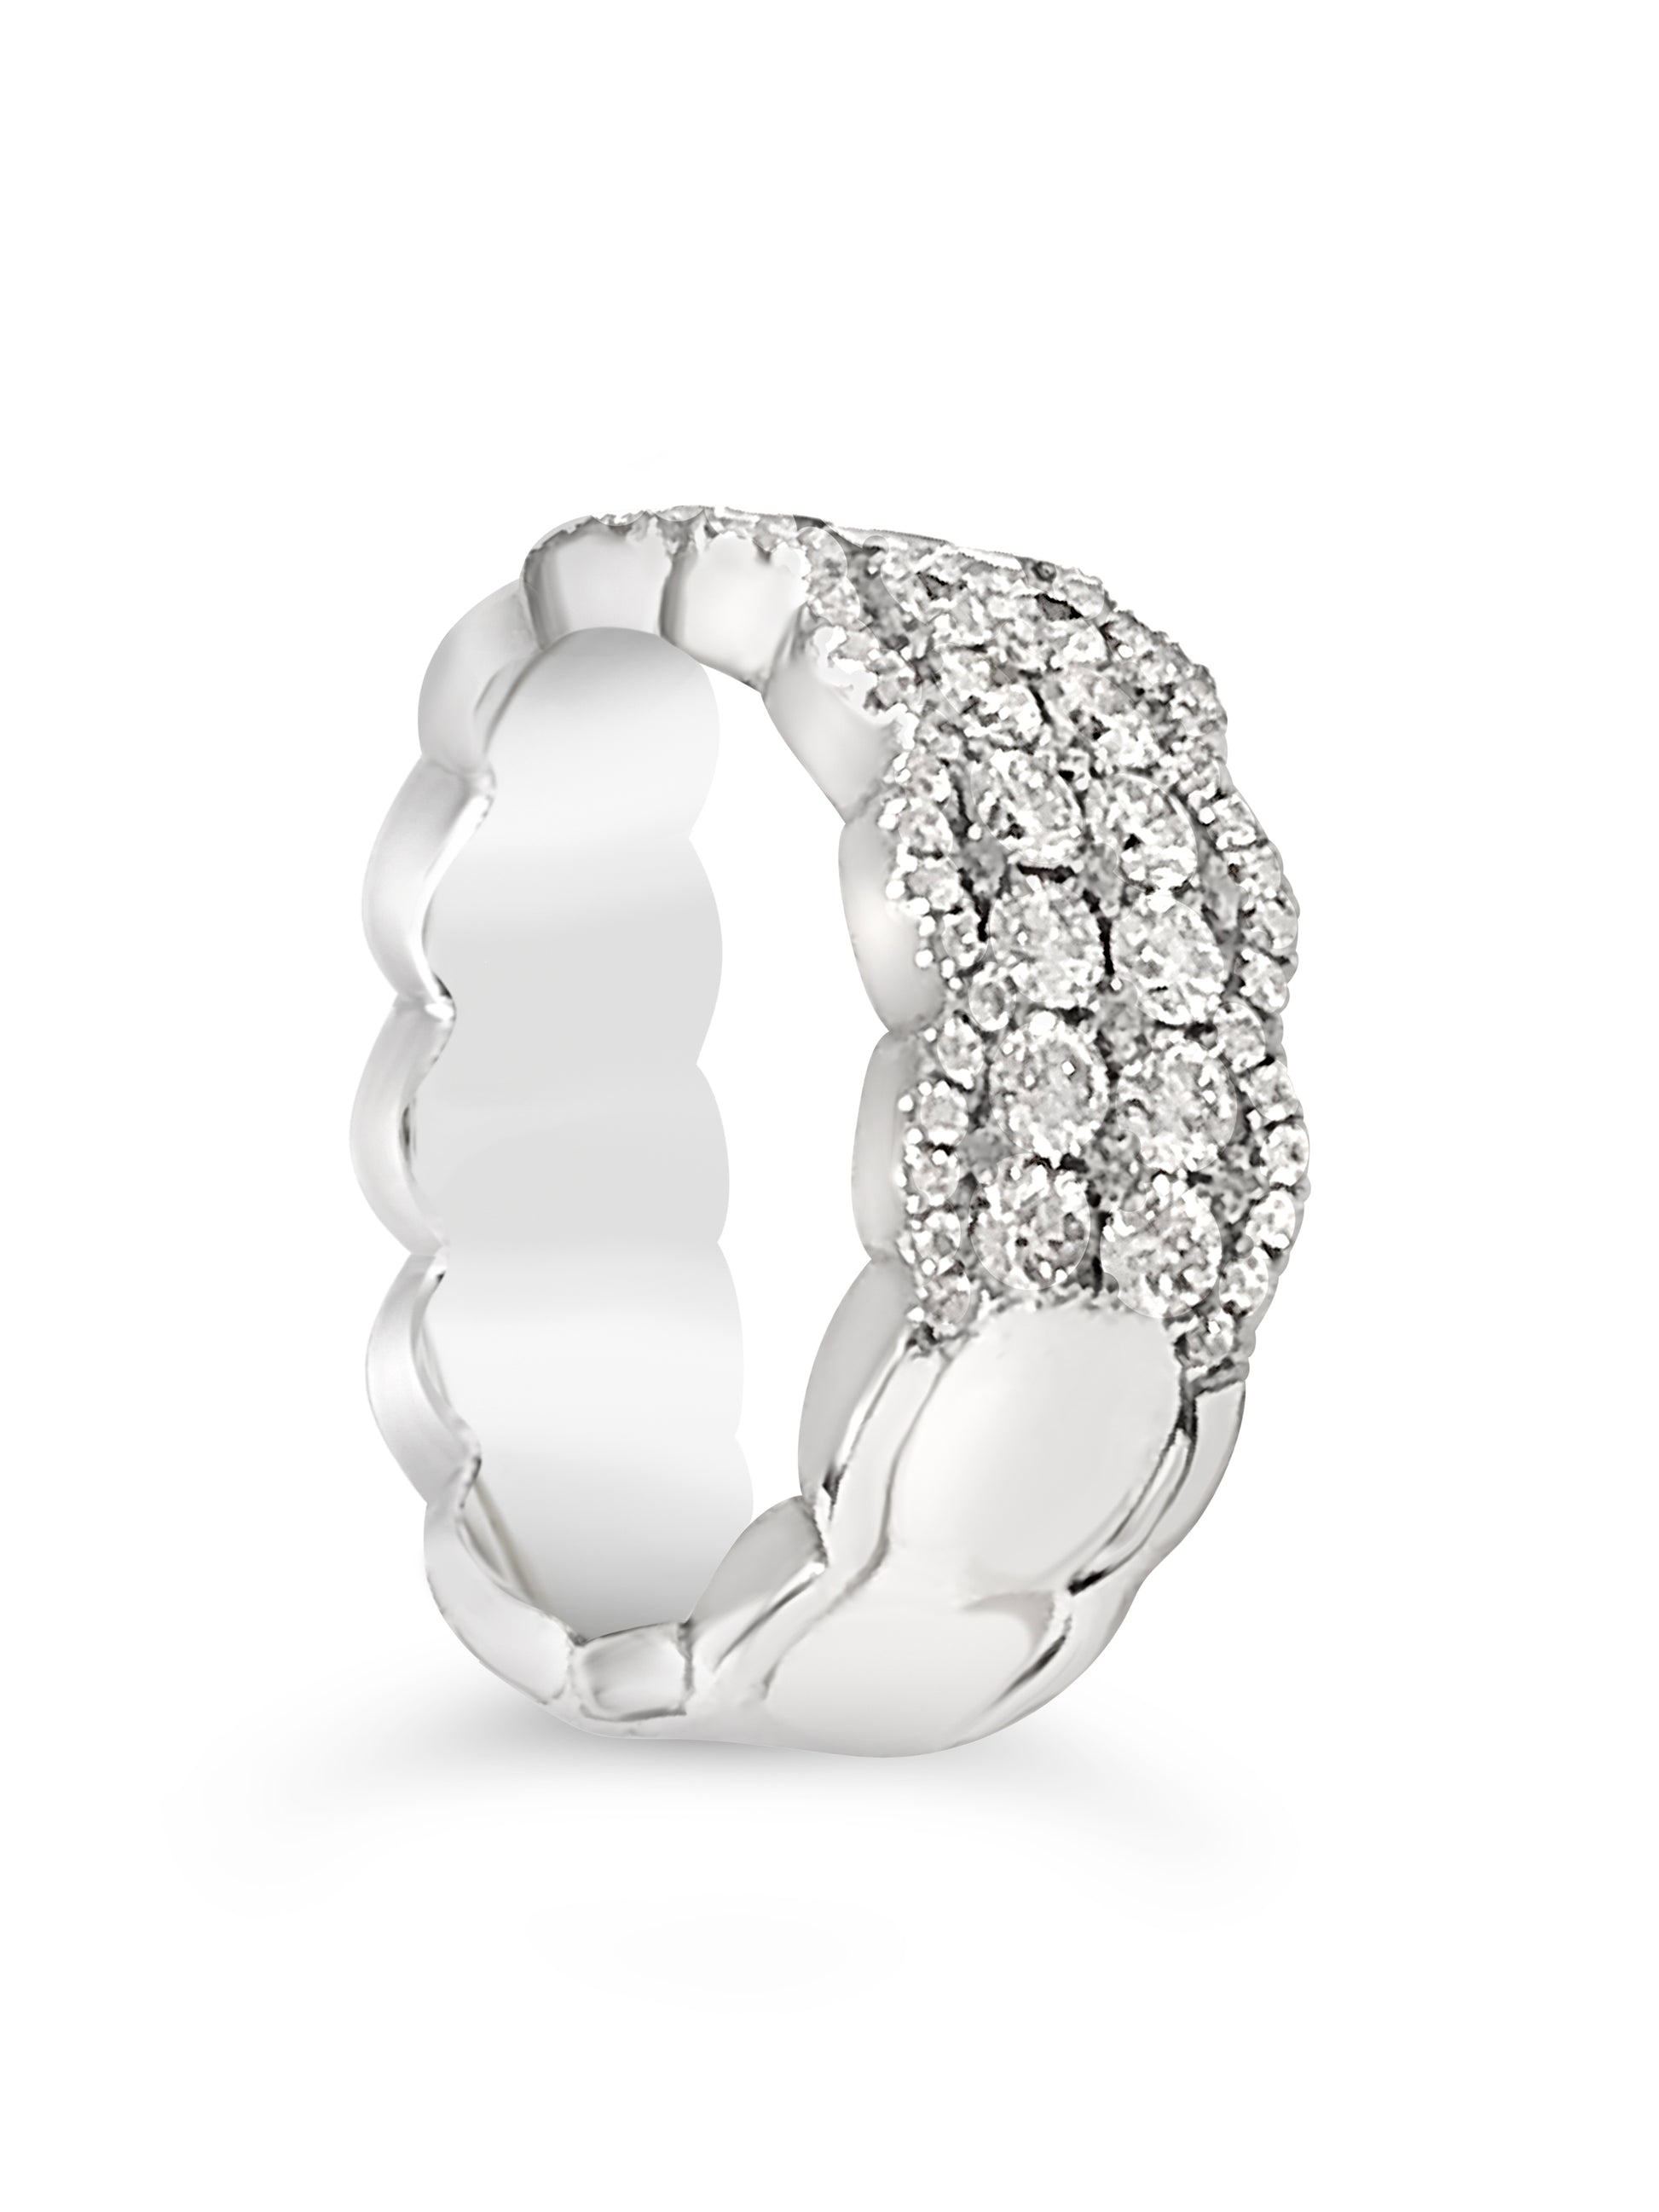 14k white gold scalloped ring with diamonds